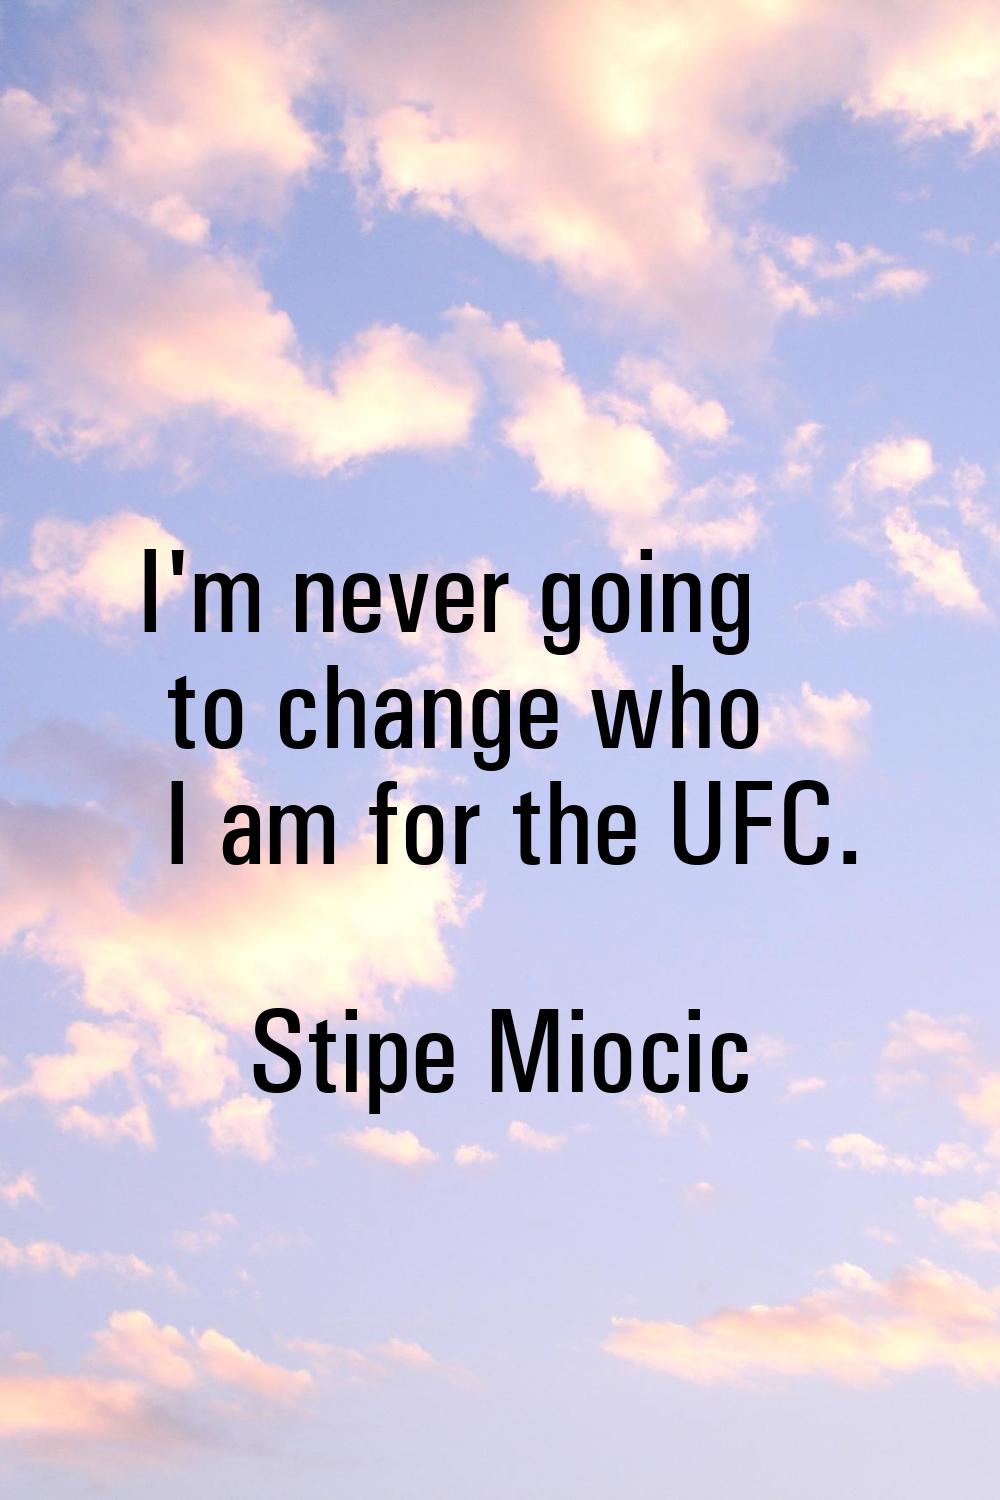 I'm never going to change who I am for the UFC.